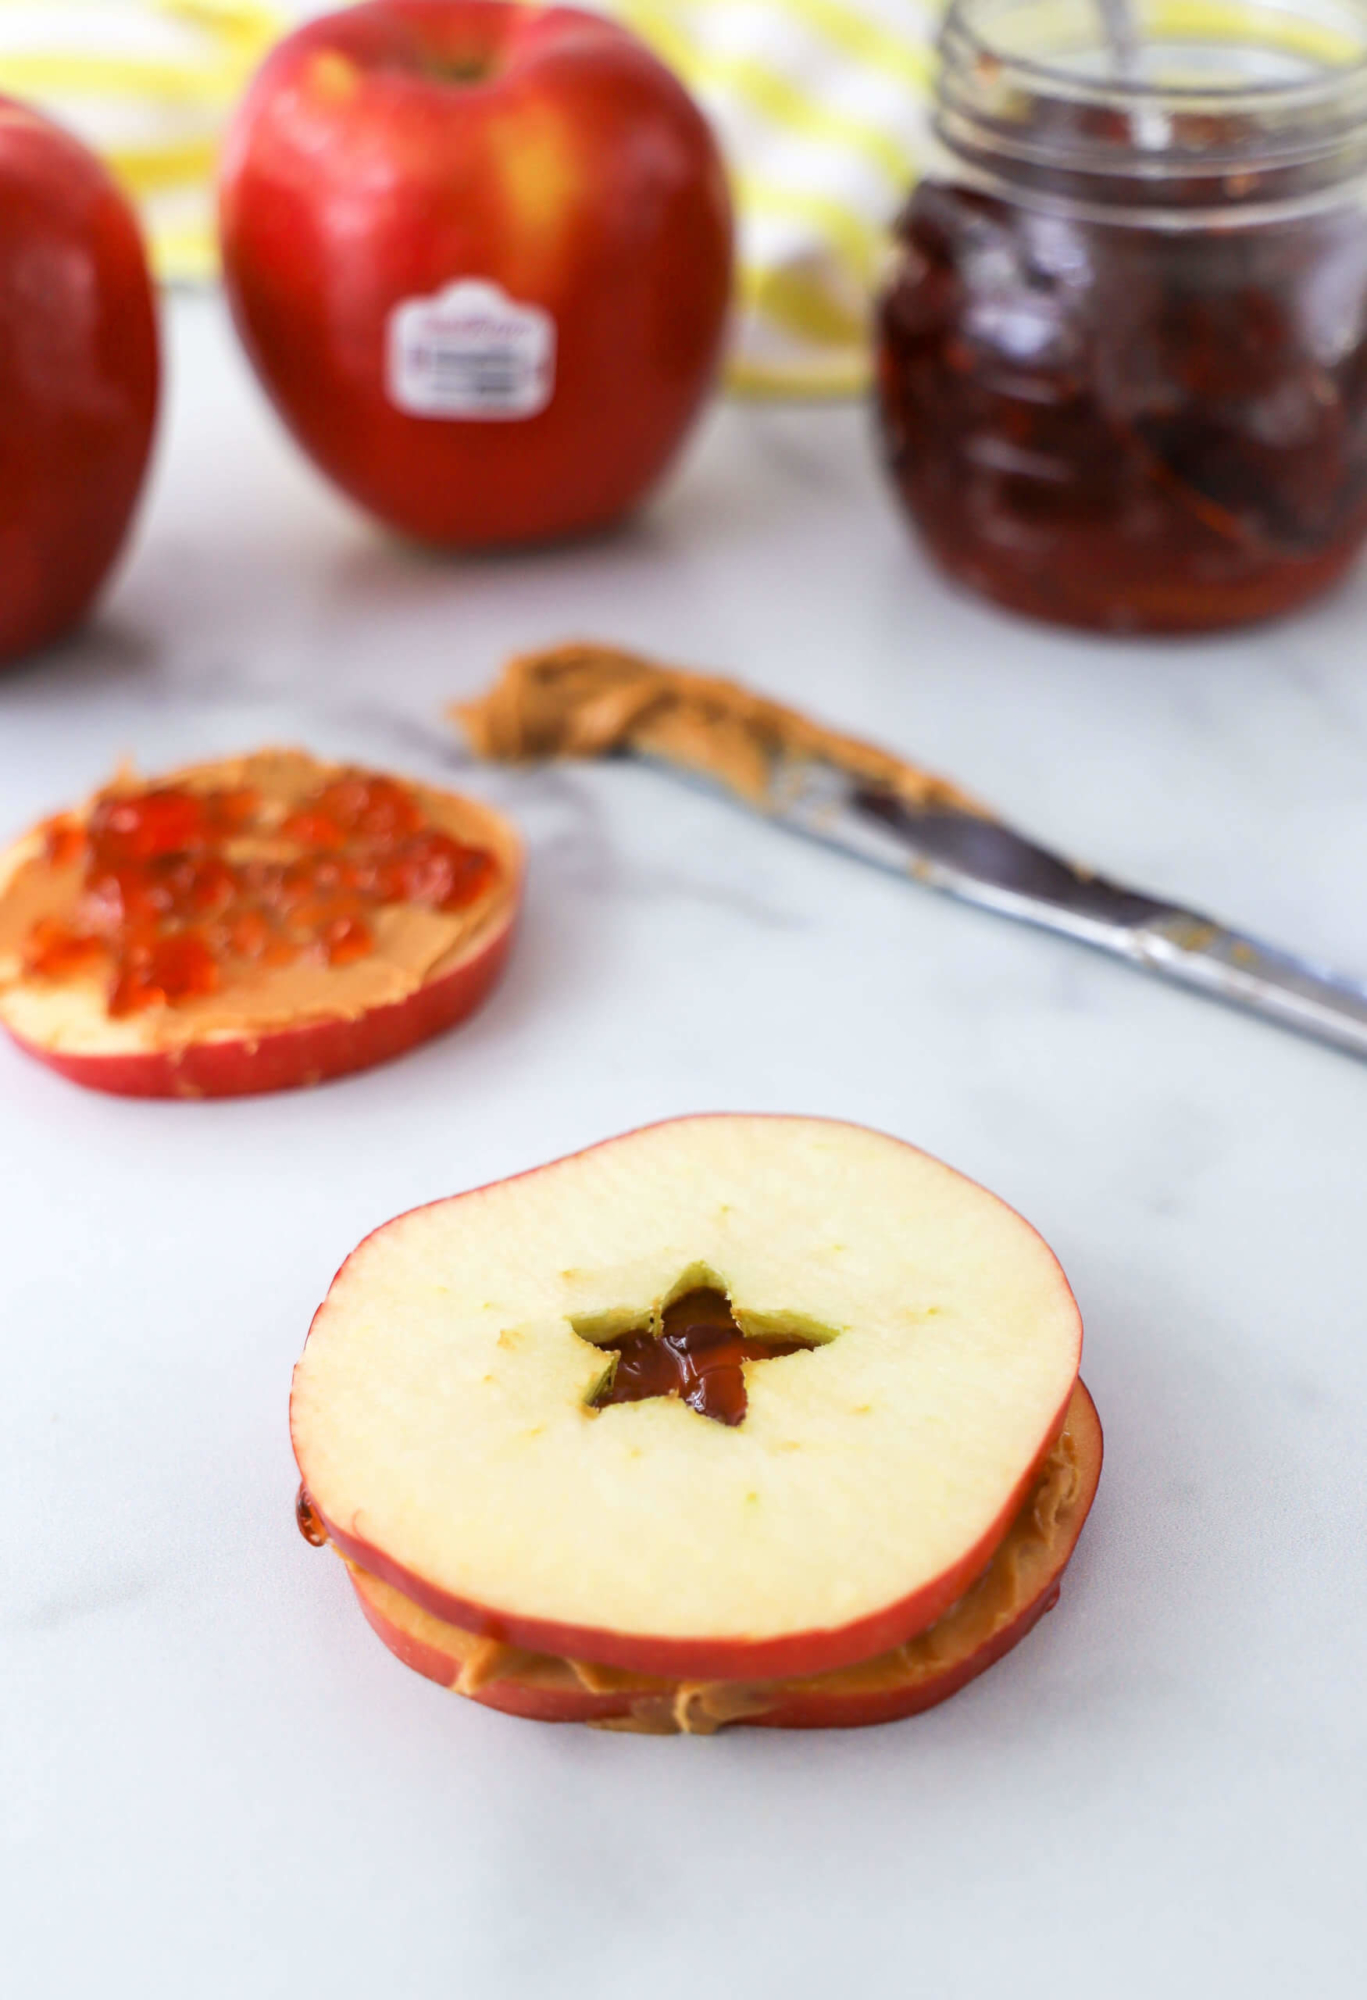 Where to Find SweeTango Apples - The Produce Moms